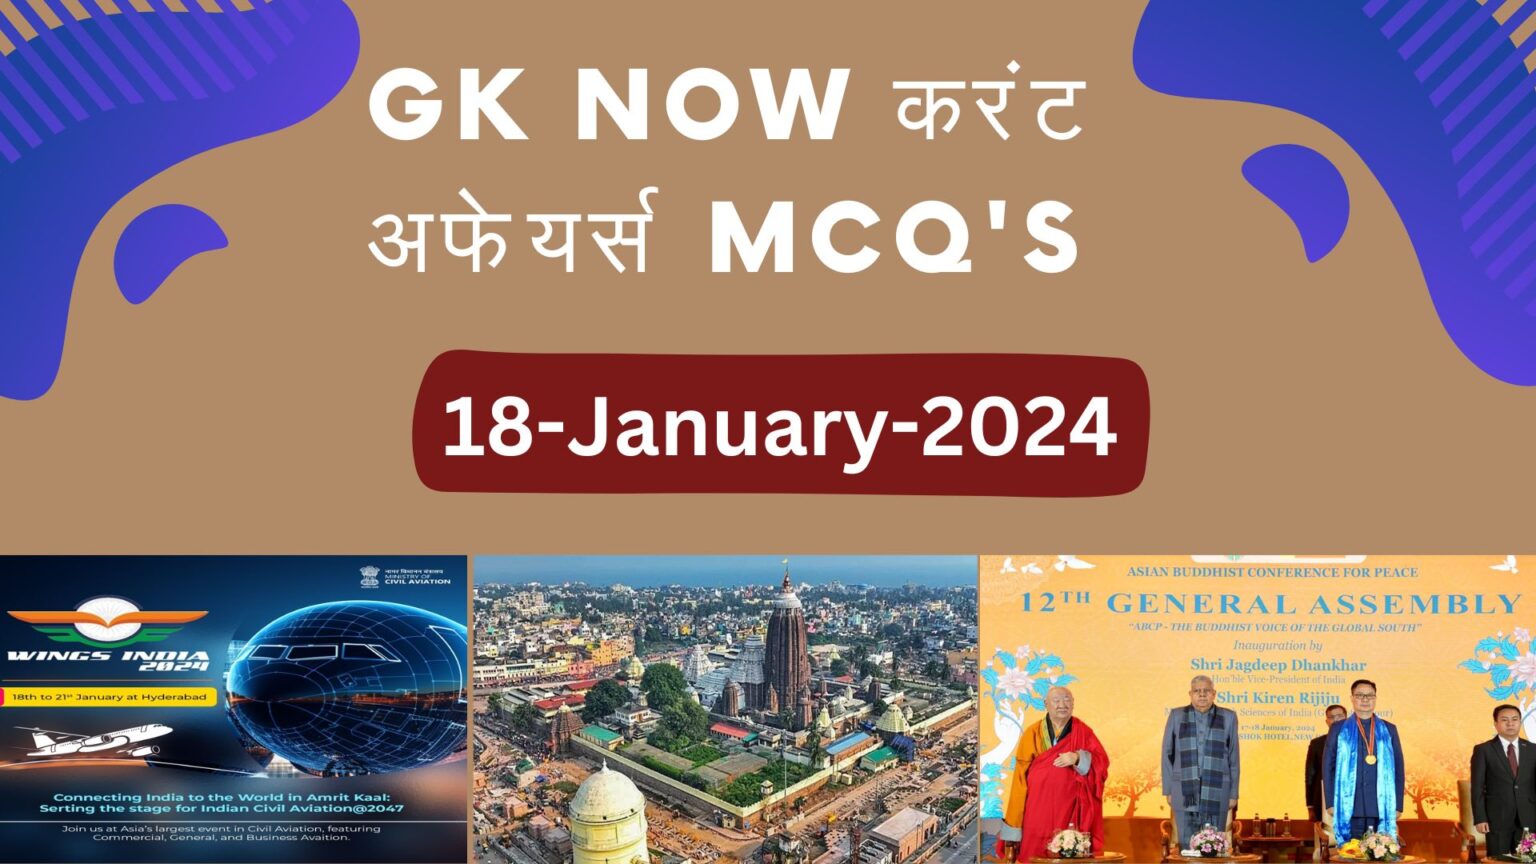 Daily Current Affairs MCQ 18 January 2024 GK Now